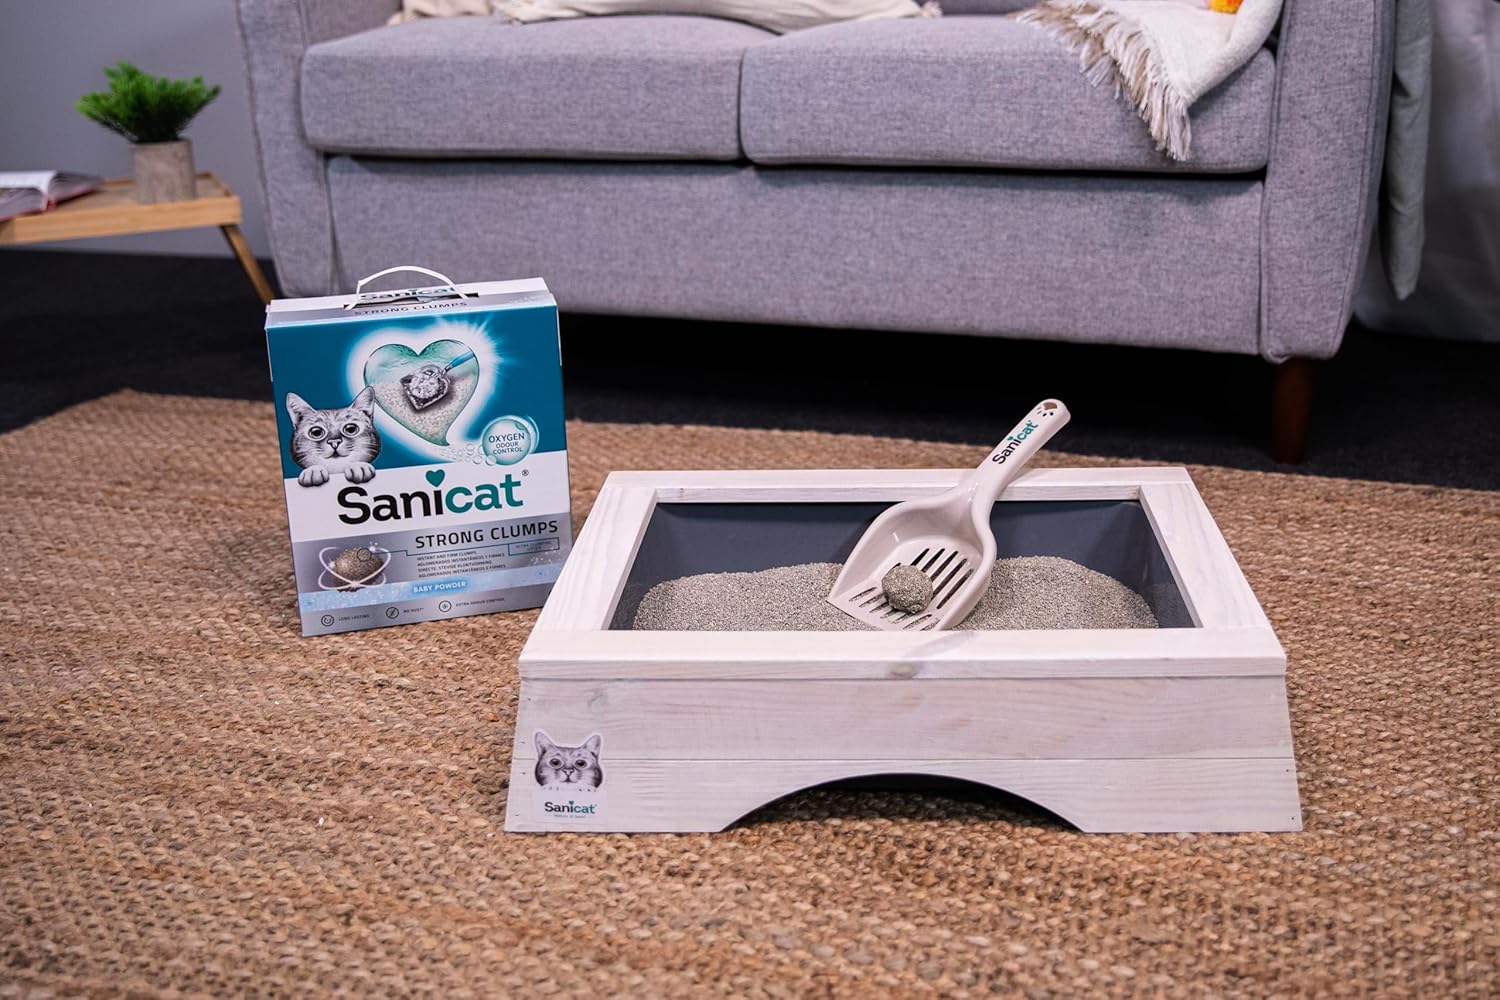 Sanicat - Ultra-clumping cat litter with the scent of baby powder | Instant compact clumps | Neutralises odours and does not produce dust | 6 L capacity :Pet Supplies